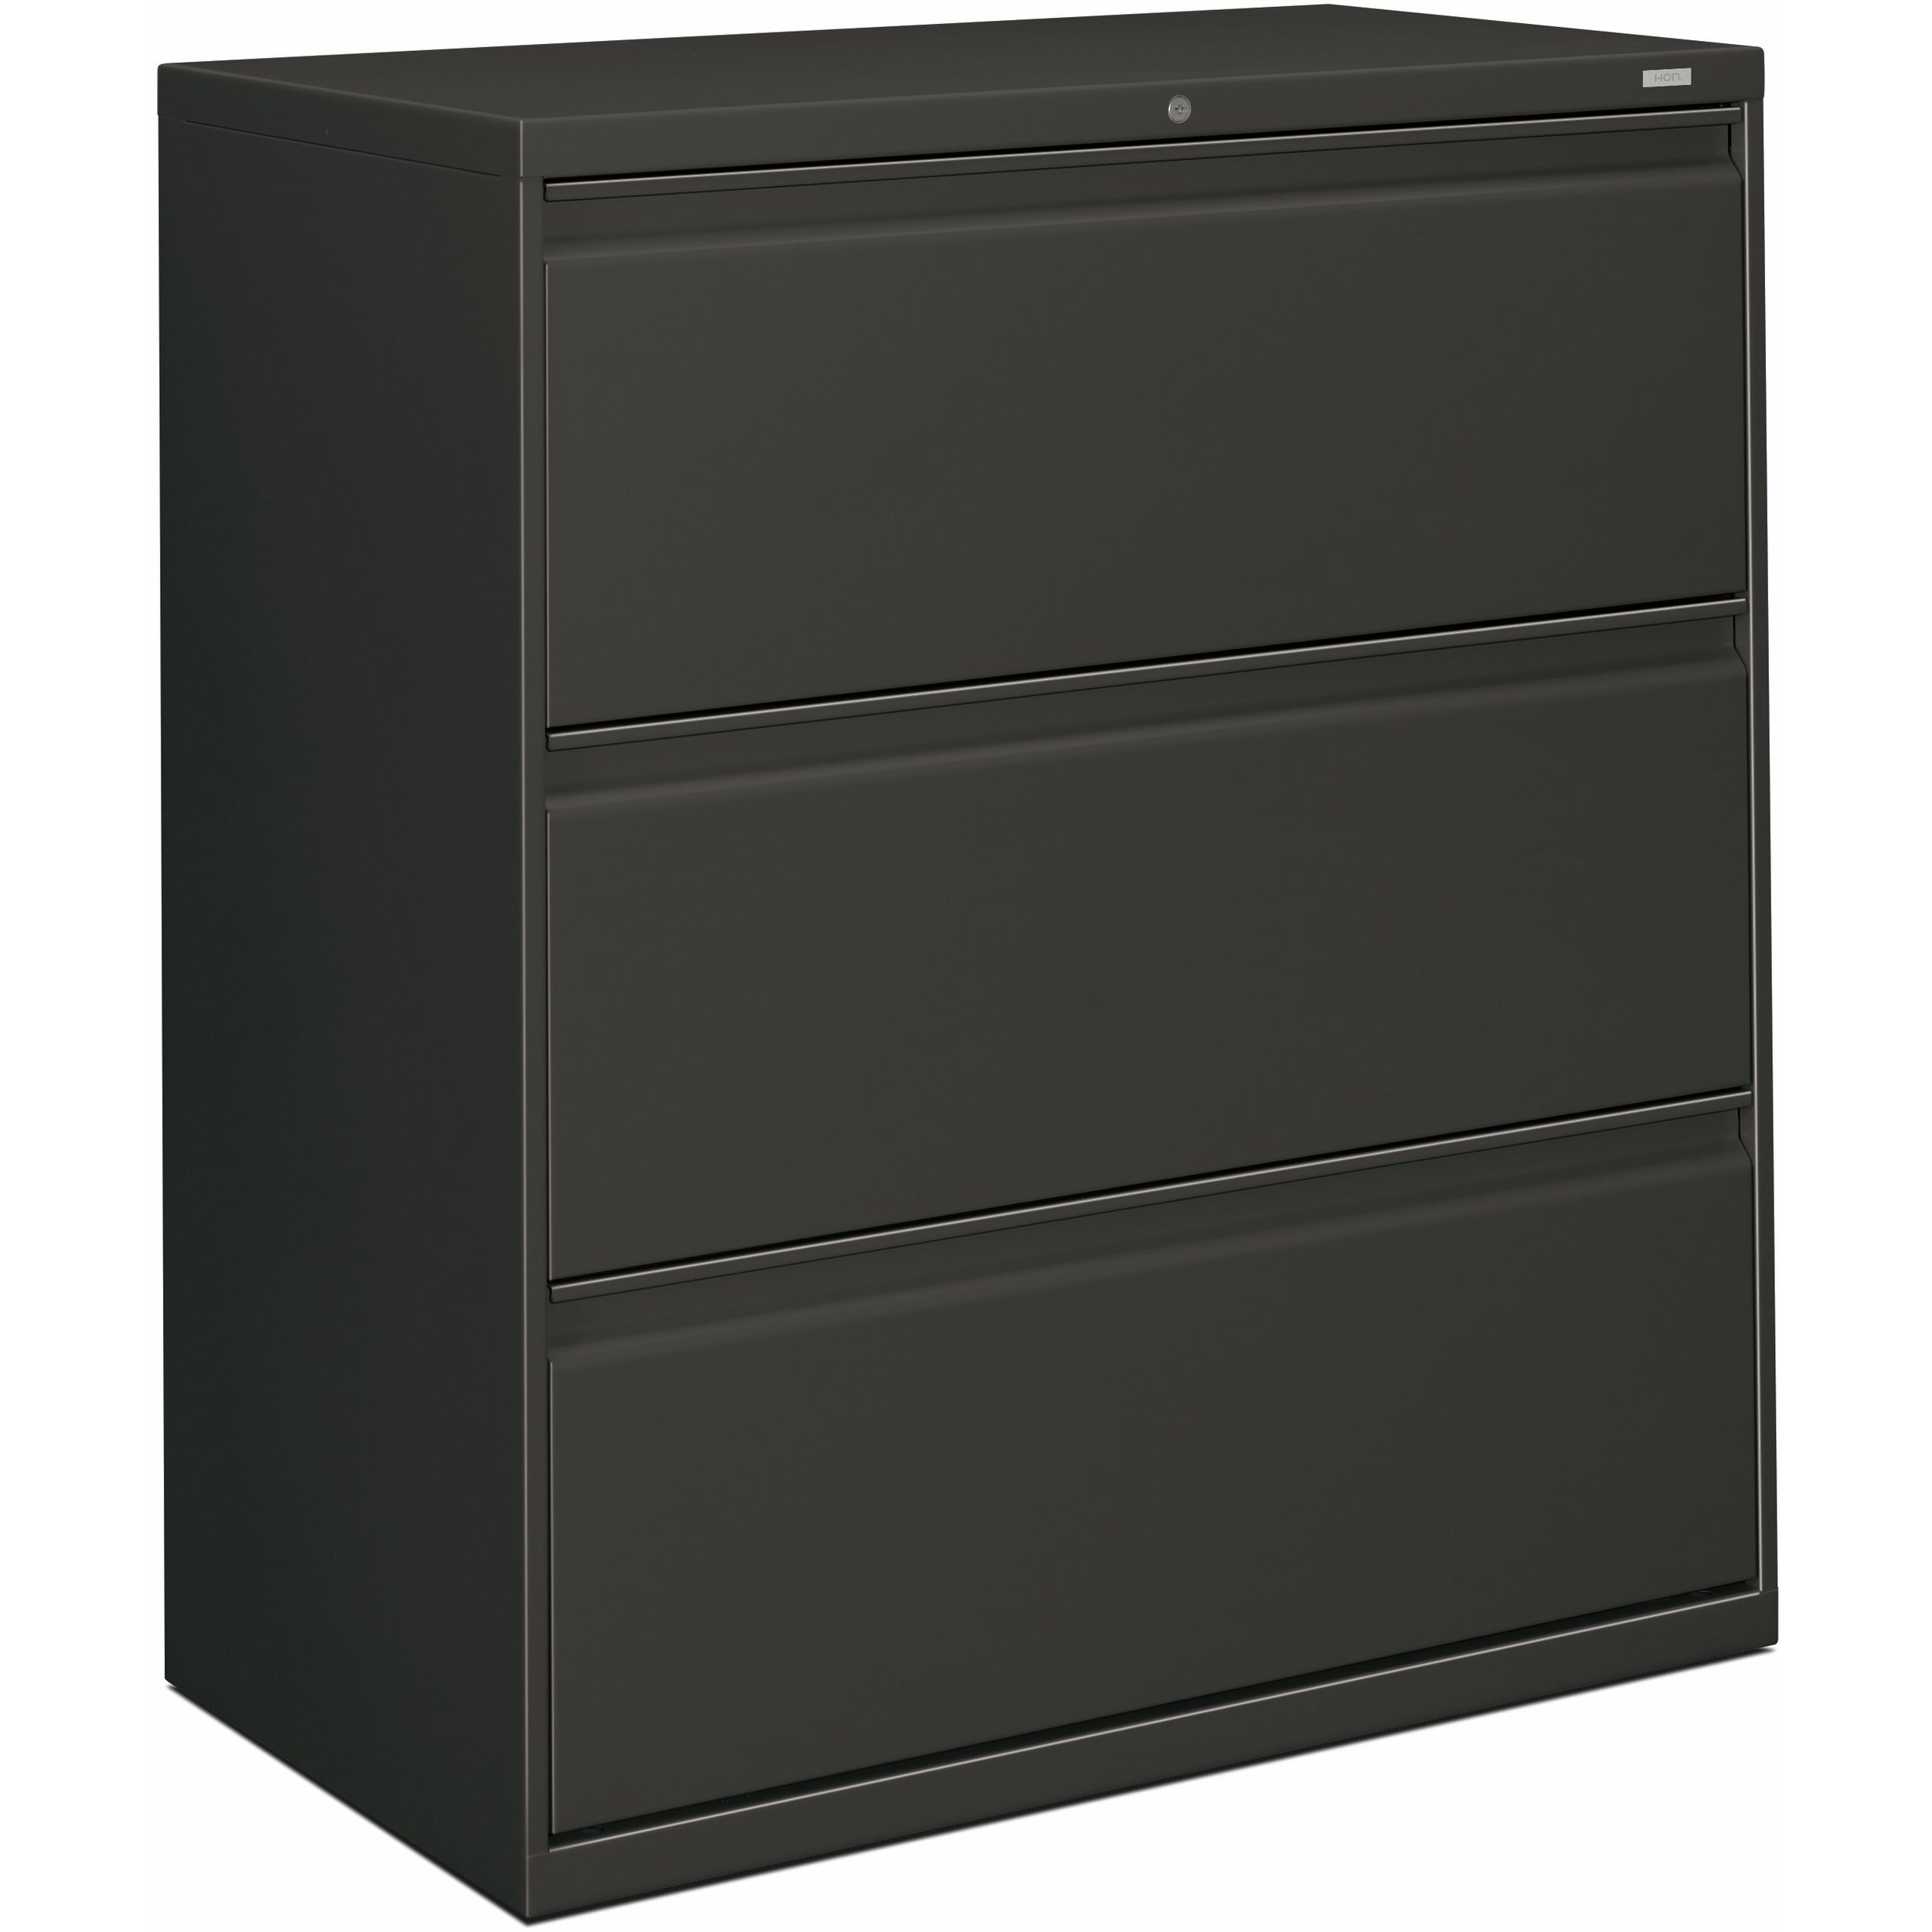 hon-brigade-800-h883-lateral-file-36-x-18409-3-drawers-finish-charcoal_hon883ls - 1